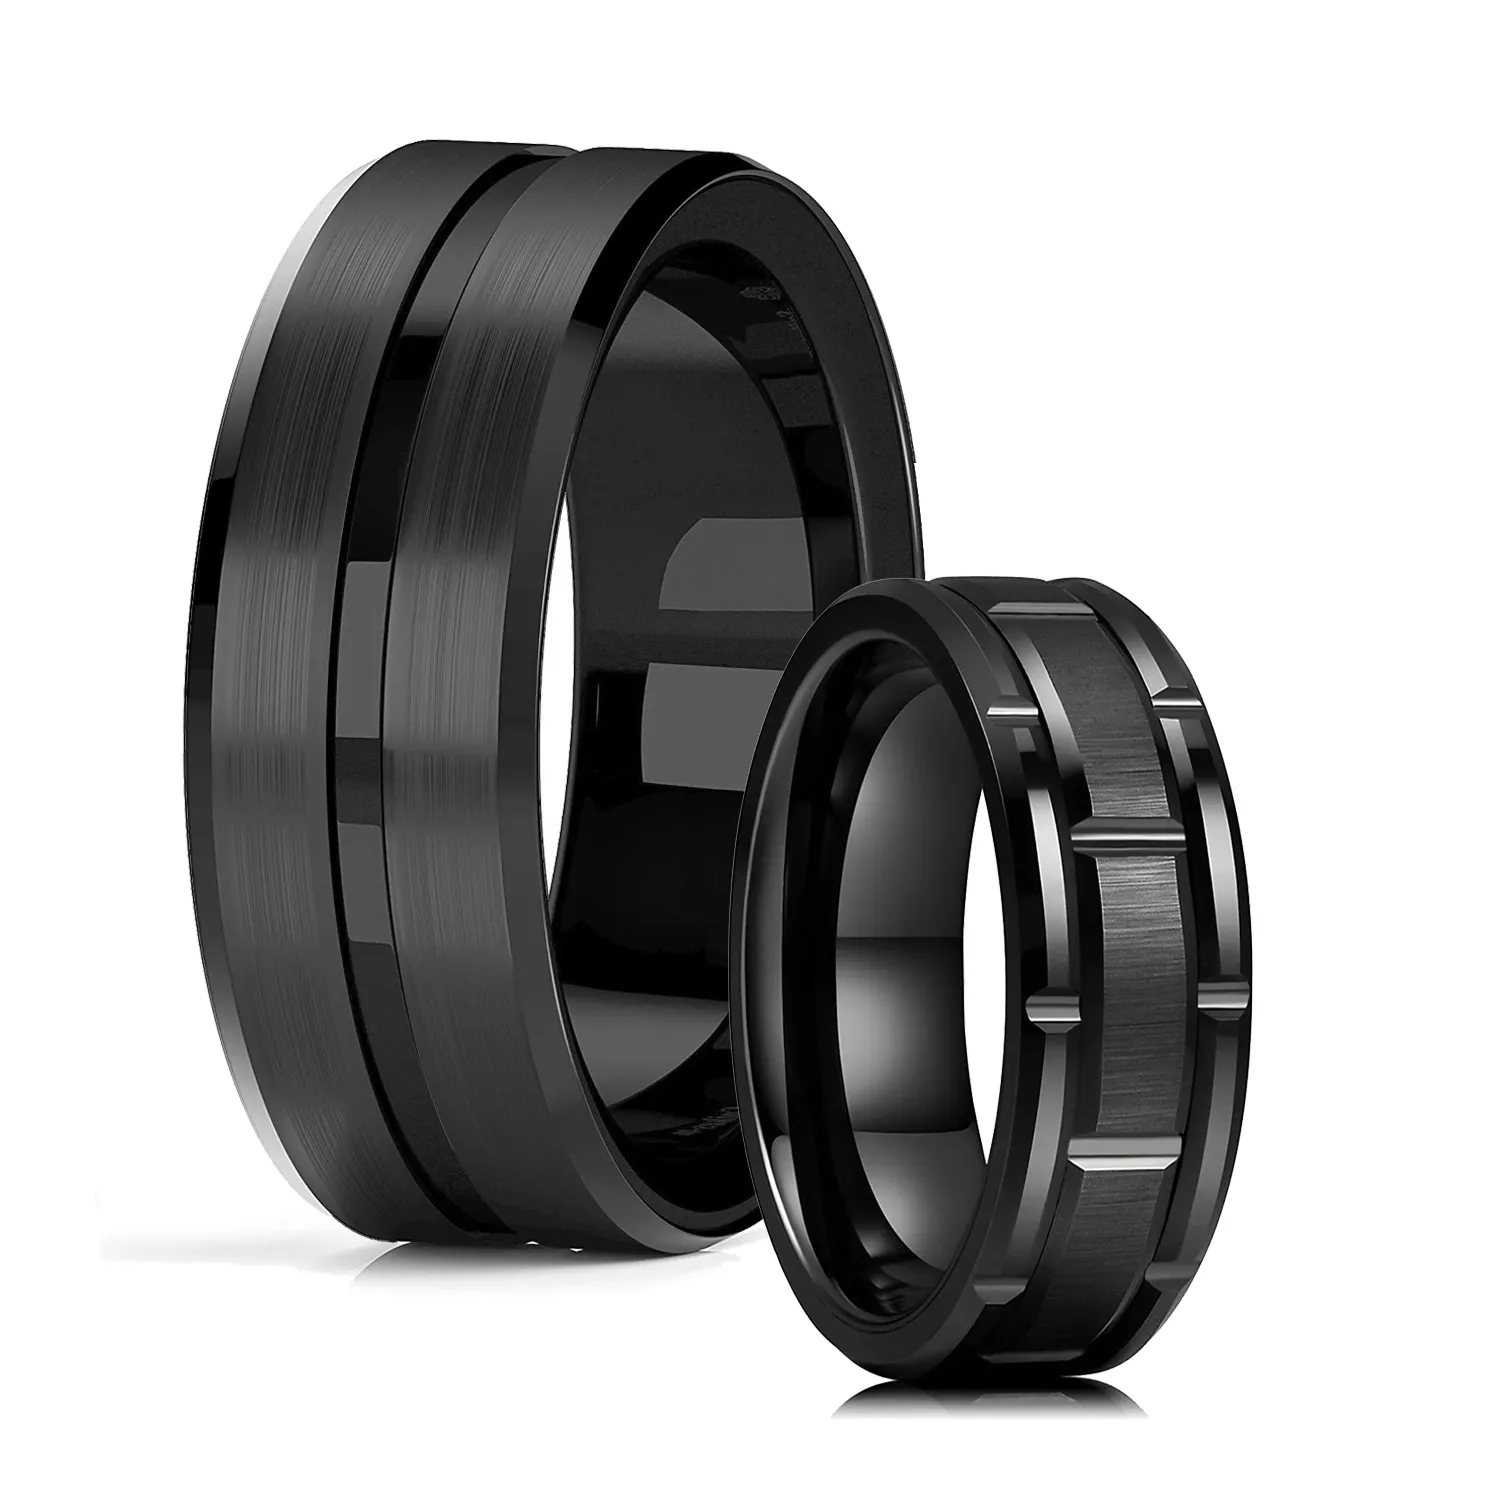 Classic Men’s 8mm Black Tungsten Wedding Rings Double Groove Beveled Edge Brick Pattern Brushed Stainless Steel Rings For Men